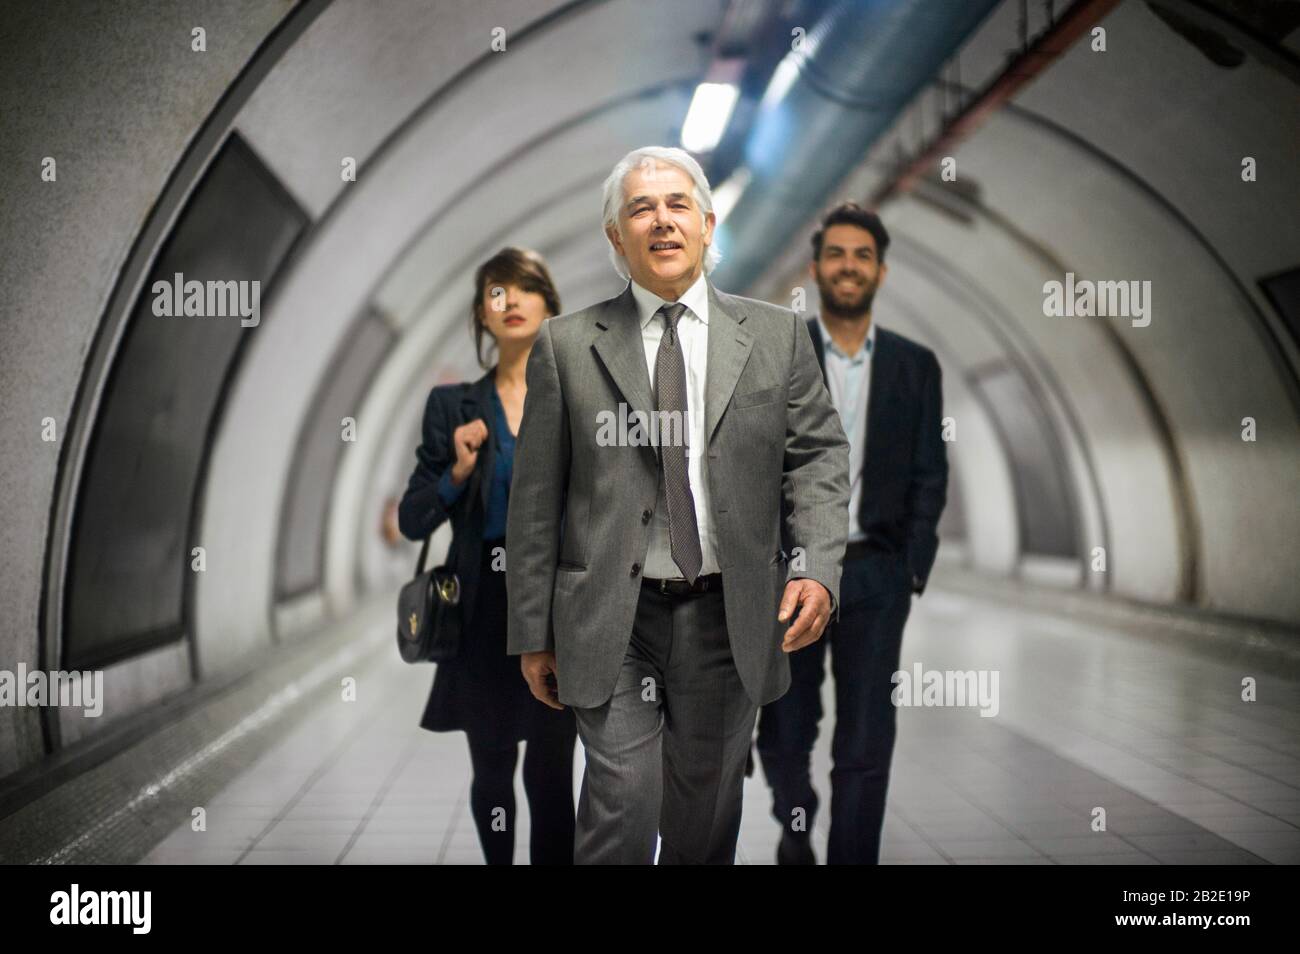 Three smiling business colleagues walking confidently in a subway tunnel Stock Photo